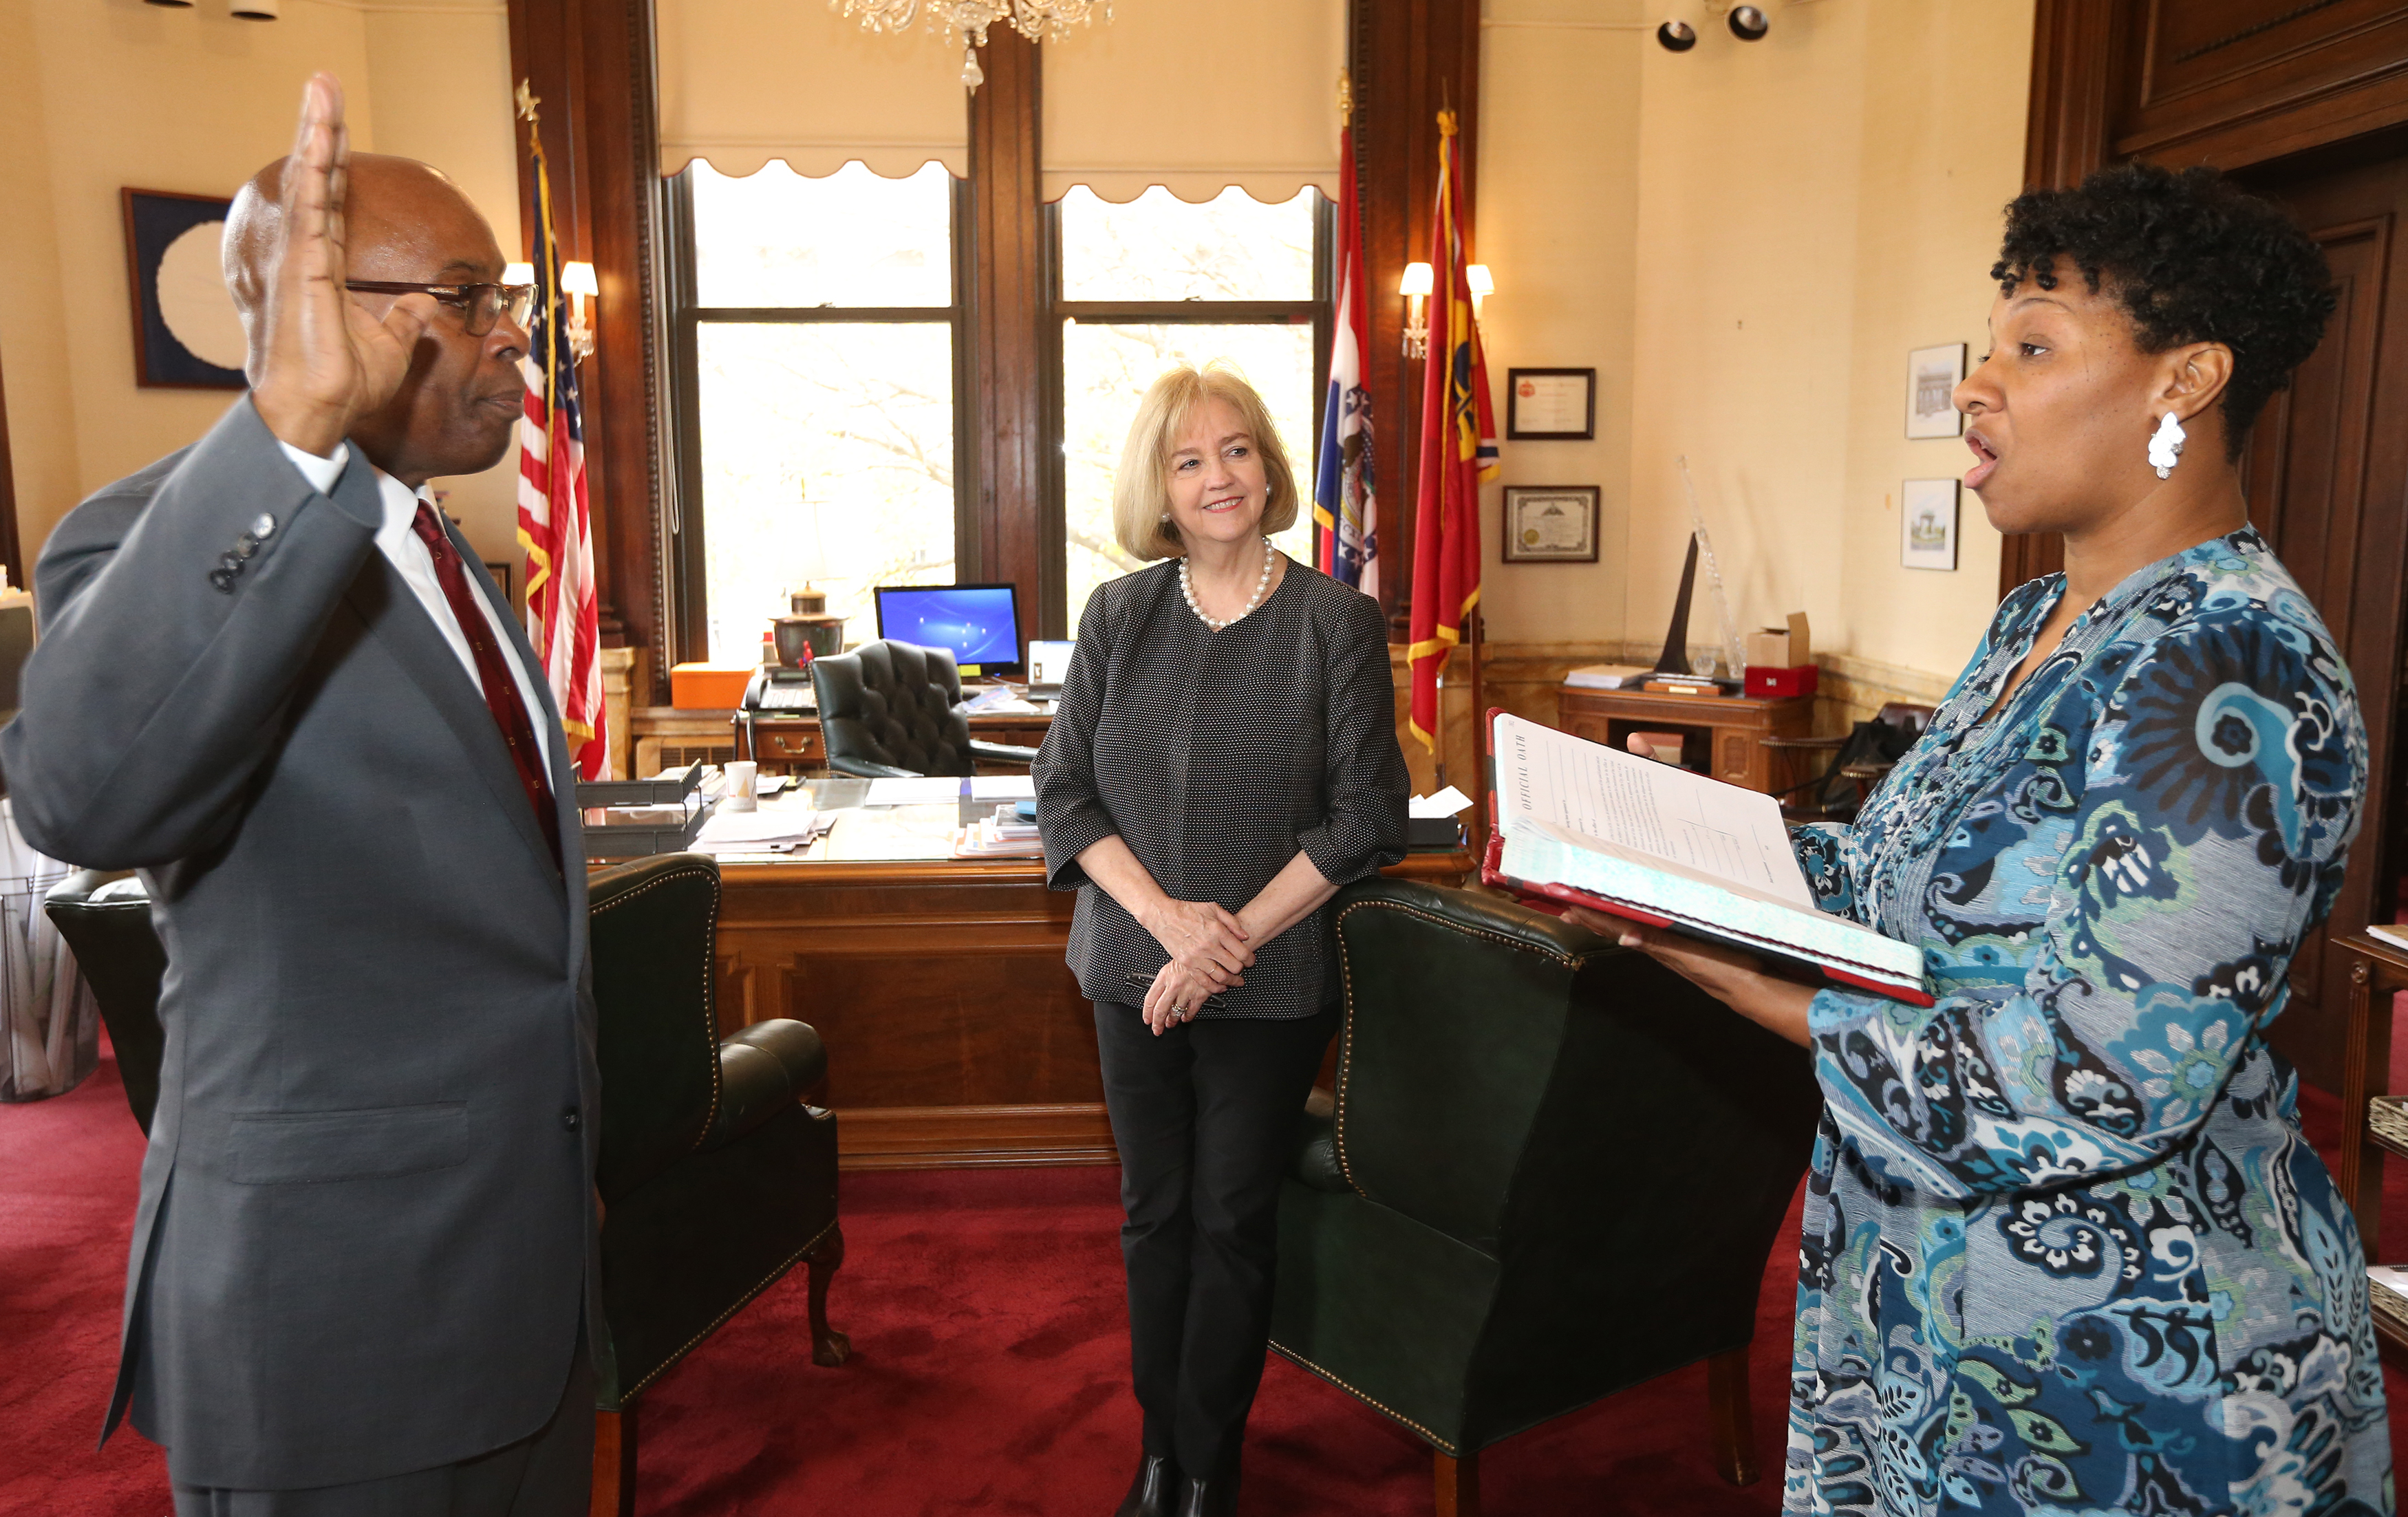 Judge Edwards is sworn in as the new Director of Public Safety on Nov. 6, 2017.